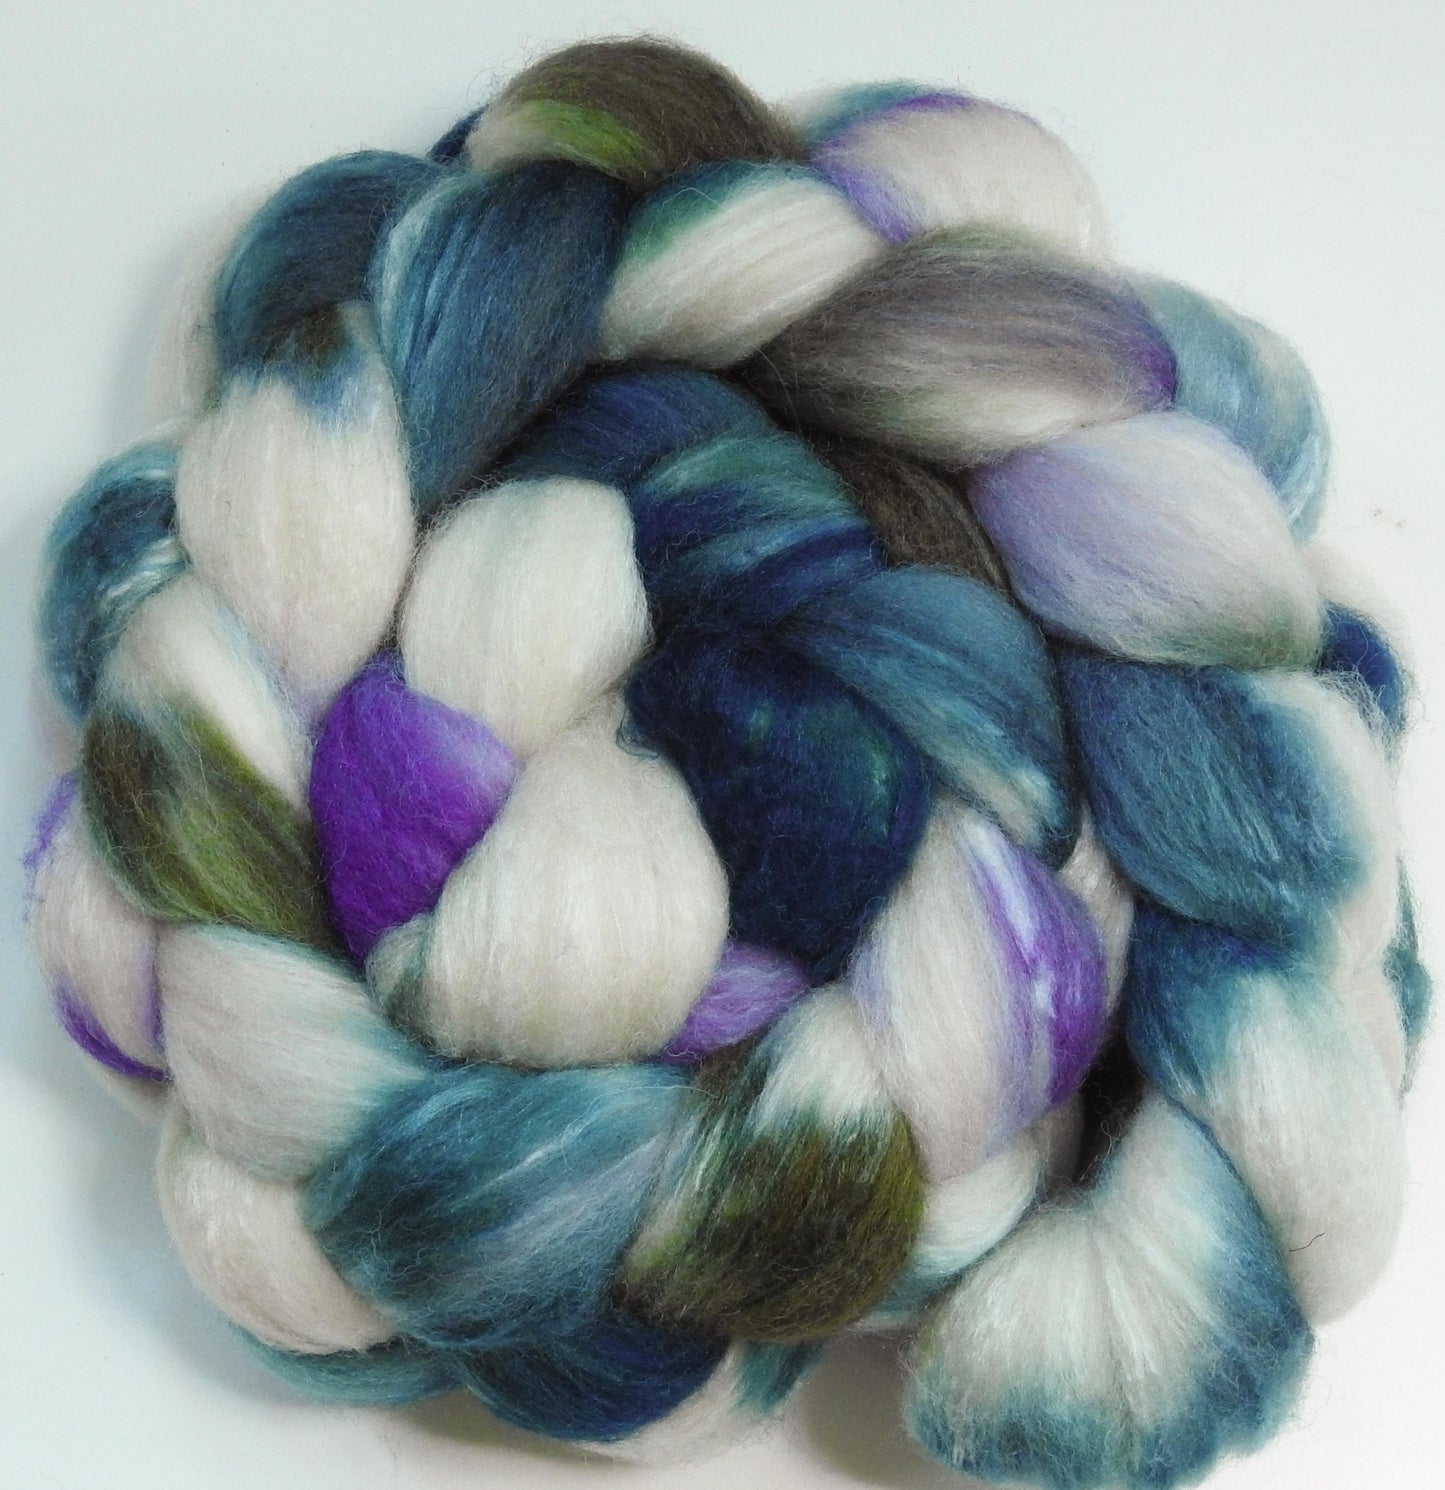 Oysters - British Southdown/ tussah silk top (65/ 35)